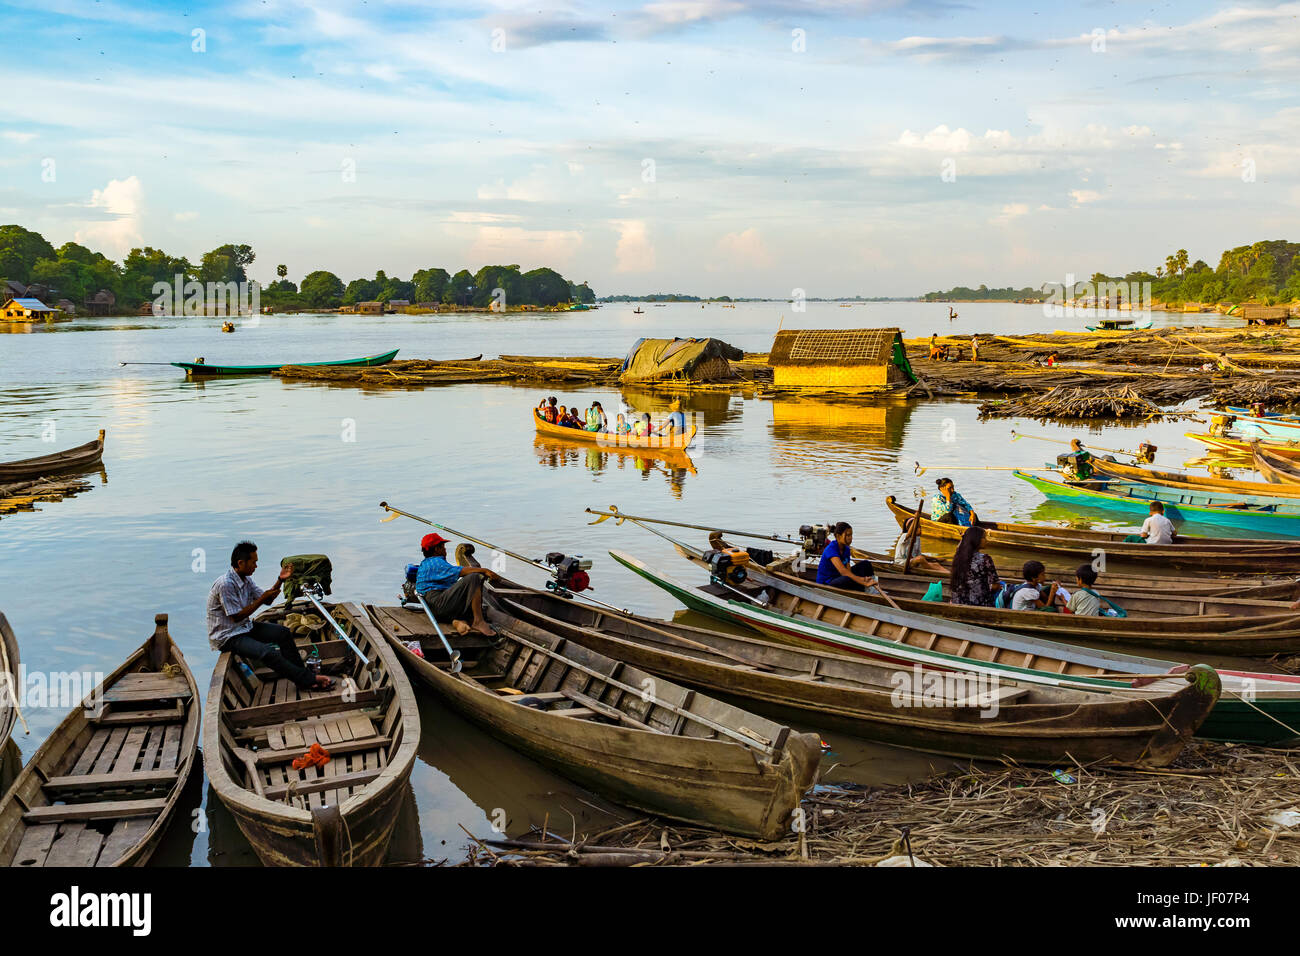 Ayeyarwaddy river, Mandalay, Myanmar. Early evening and moored boats are ready to take the city workers back across the great river. Stock Photo